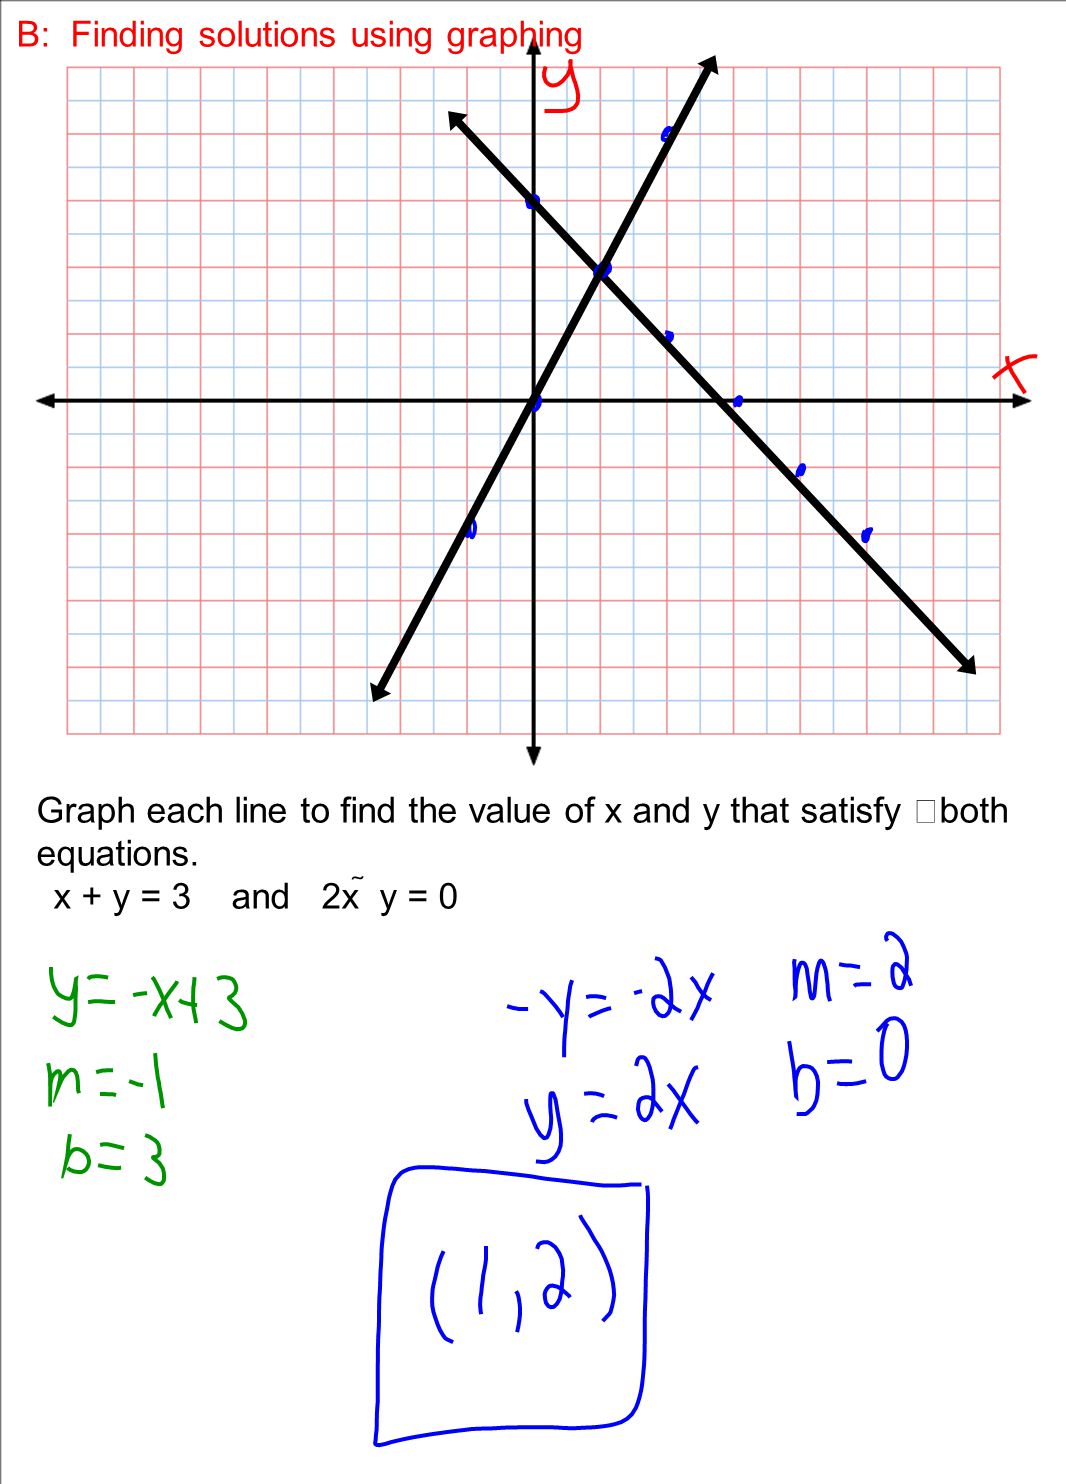 B: Finding solutions using graphing